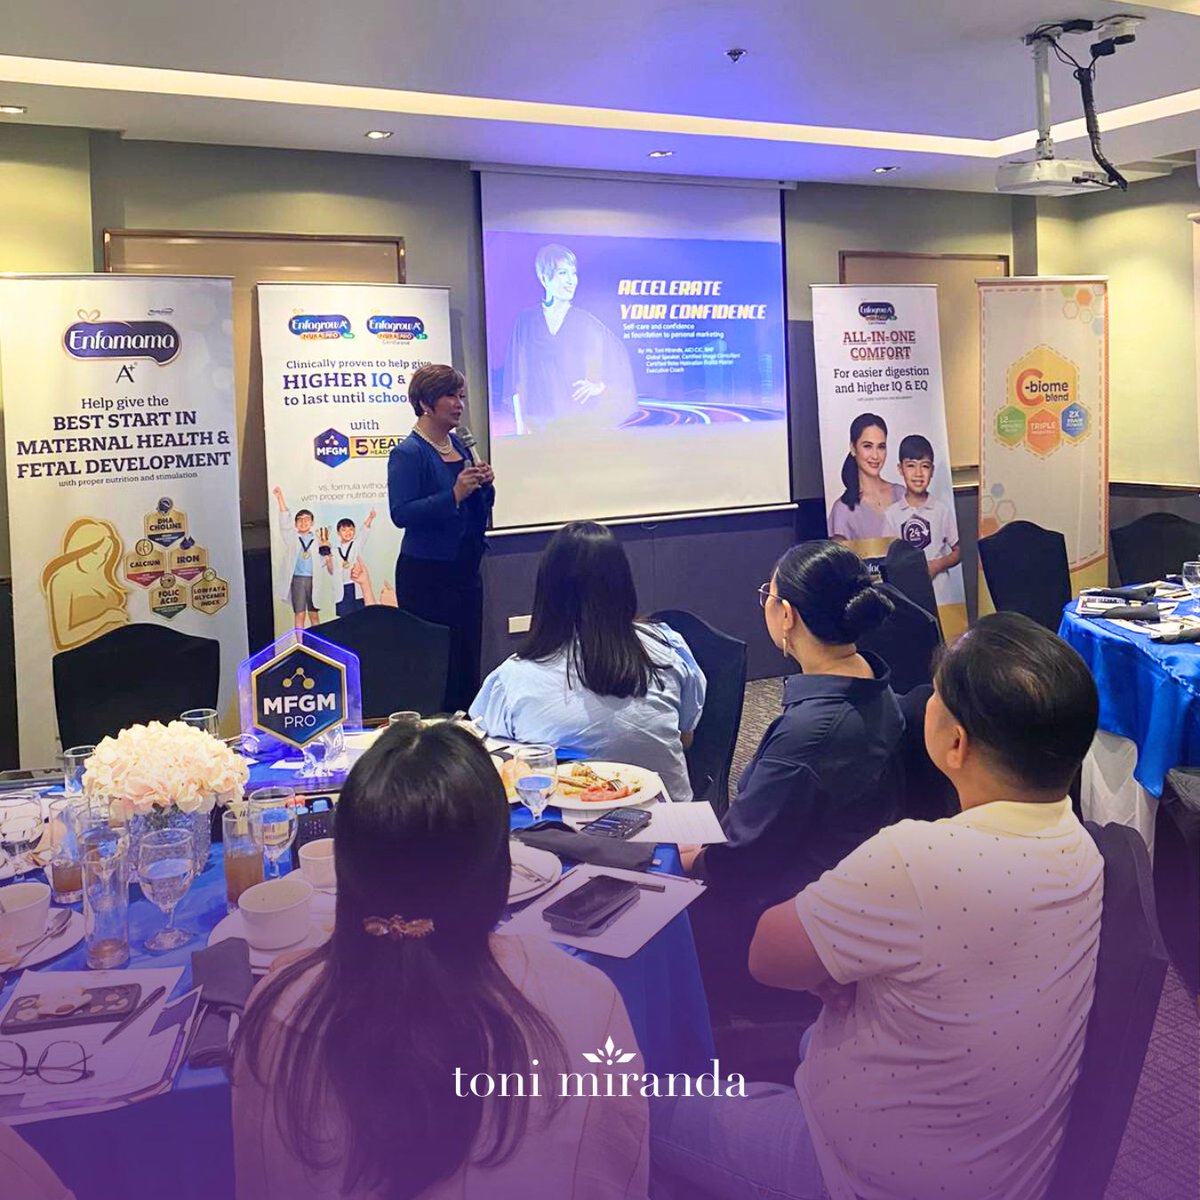 I am happy to empower Pangasinan's health pros! As a Certified Image Consultant, honored to boost confidence & success in healthcare. Cultivating a professional image is key to patient trust & career growth. #HealthcareTransformation #ProfessionalImage #HealthcareLeadership